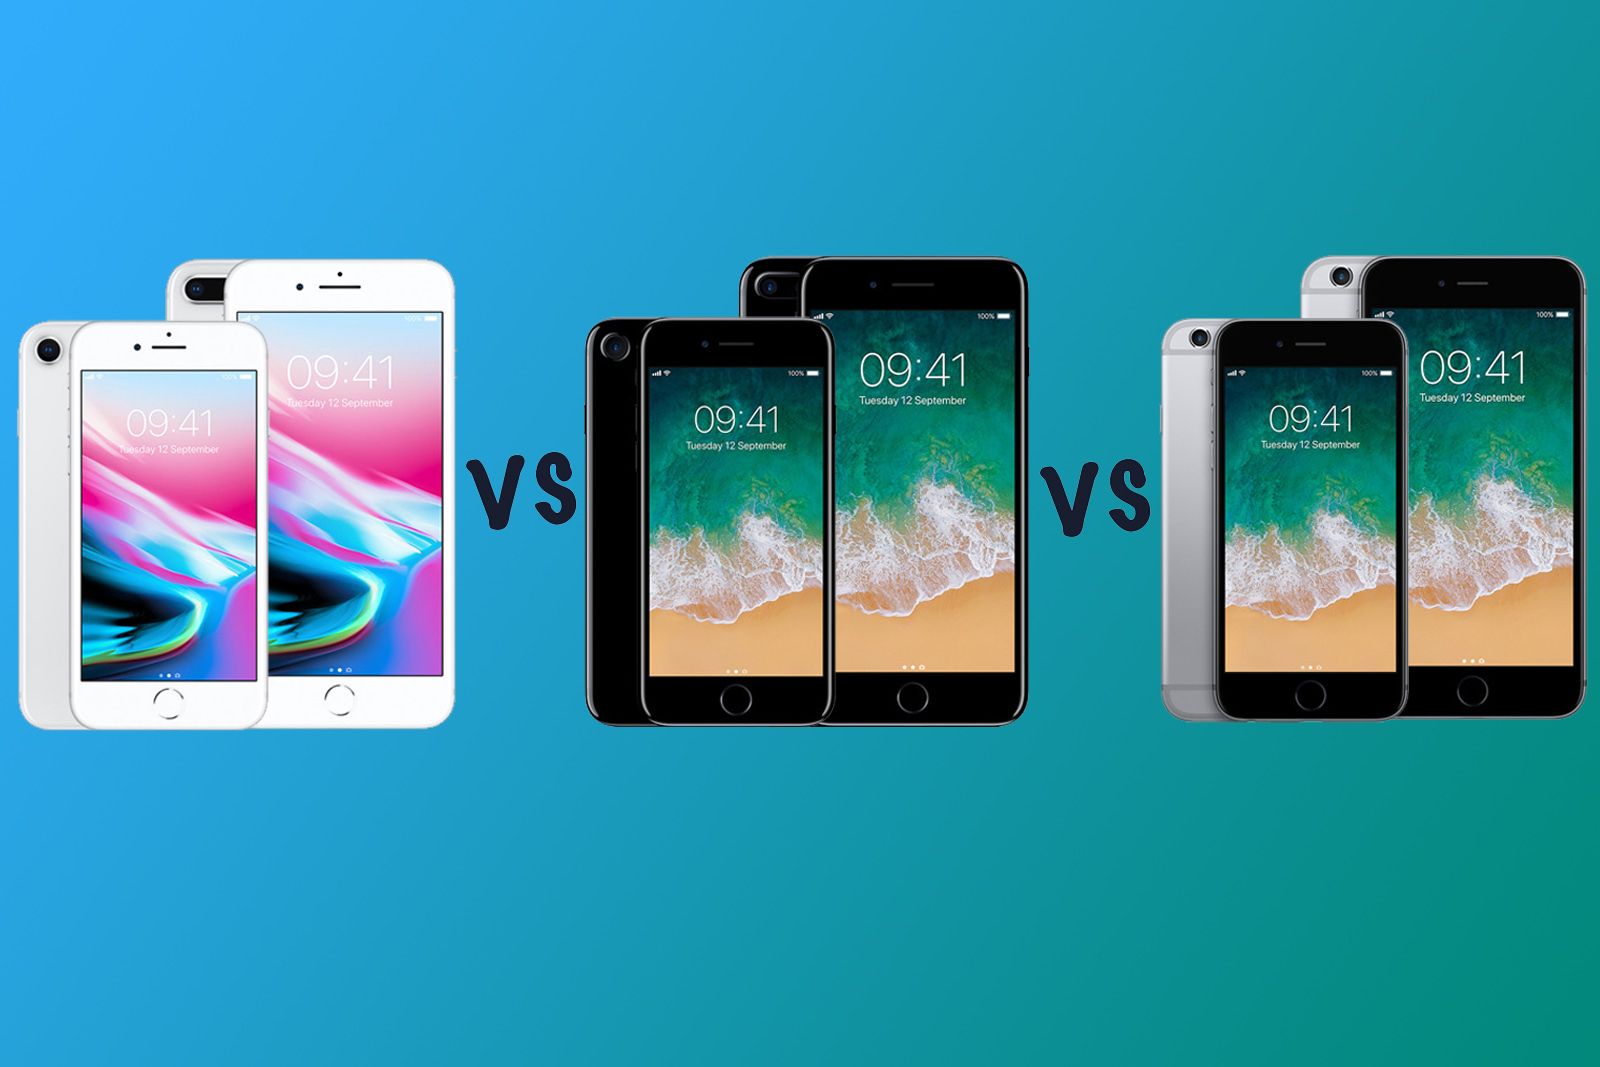 iPhone 7 Vs iPhone 6S: What's The Difference?